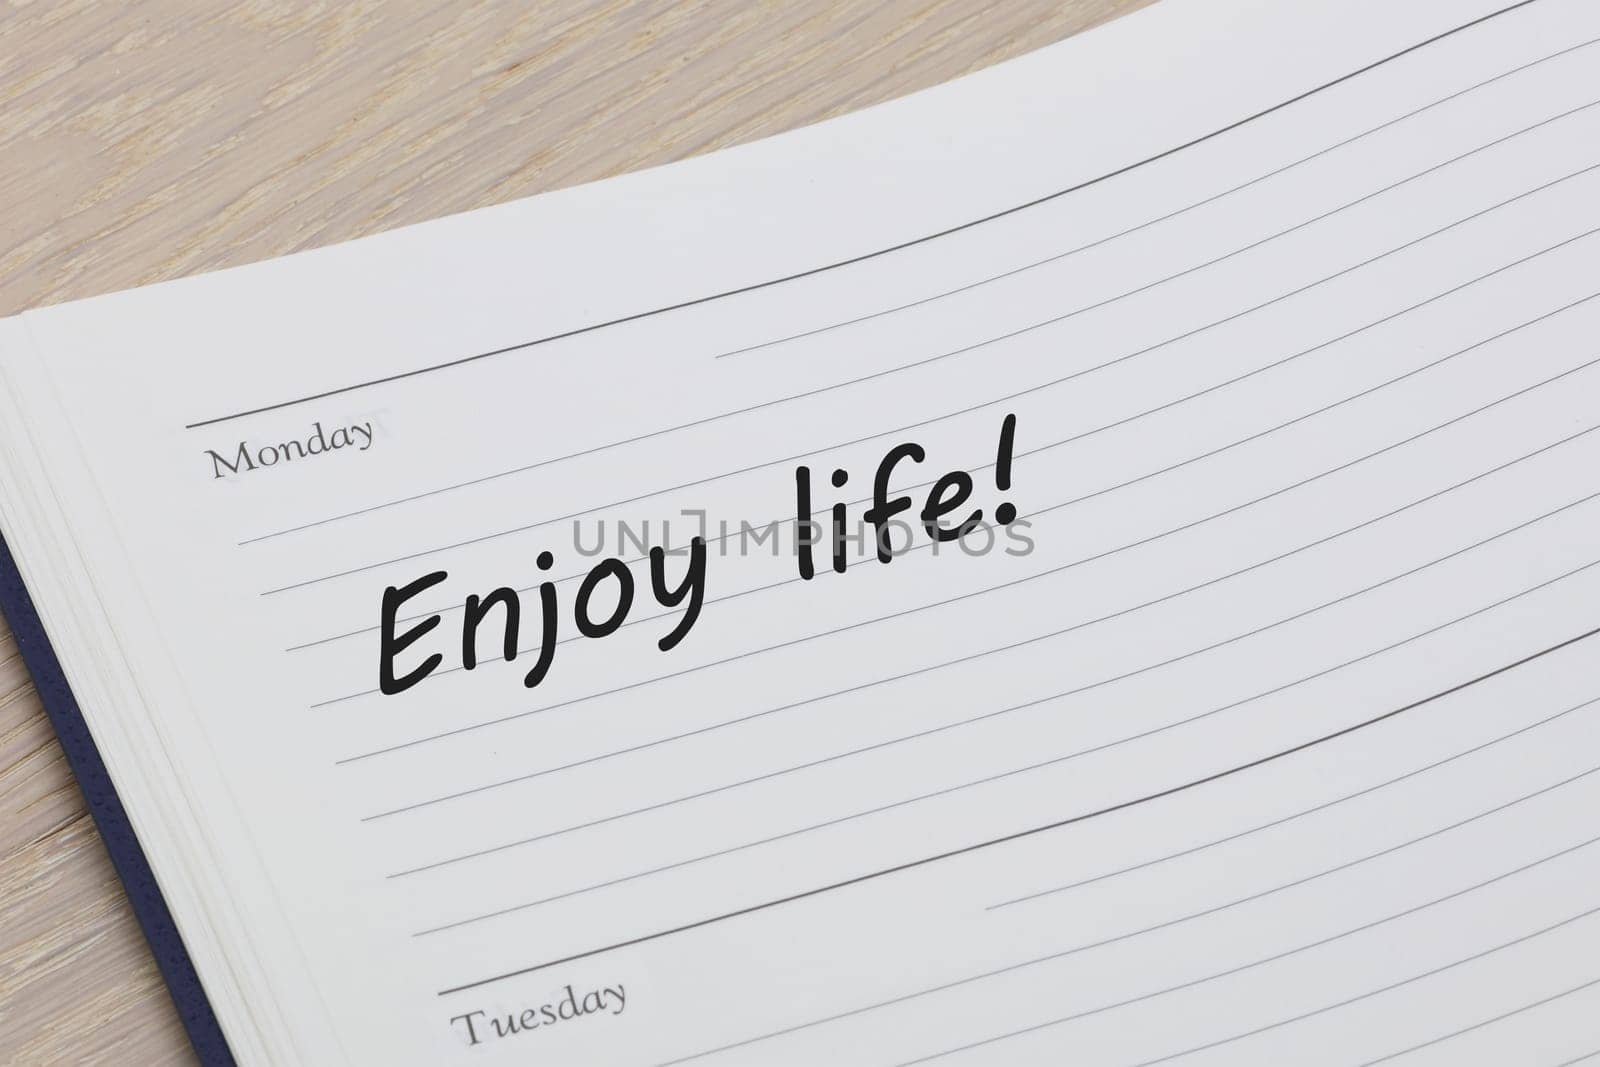 An Enjoy life reminder message in an open diary